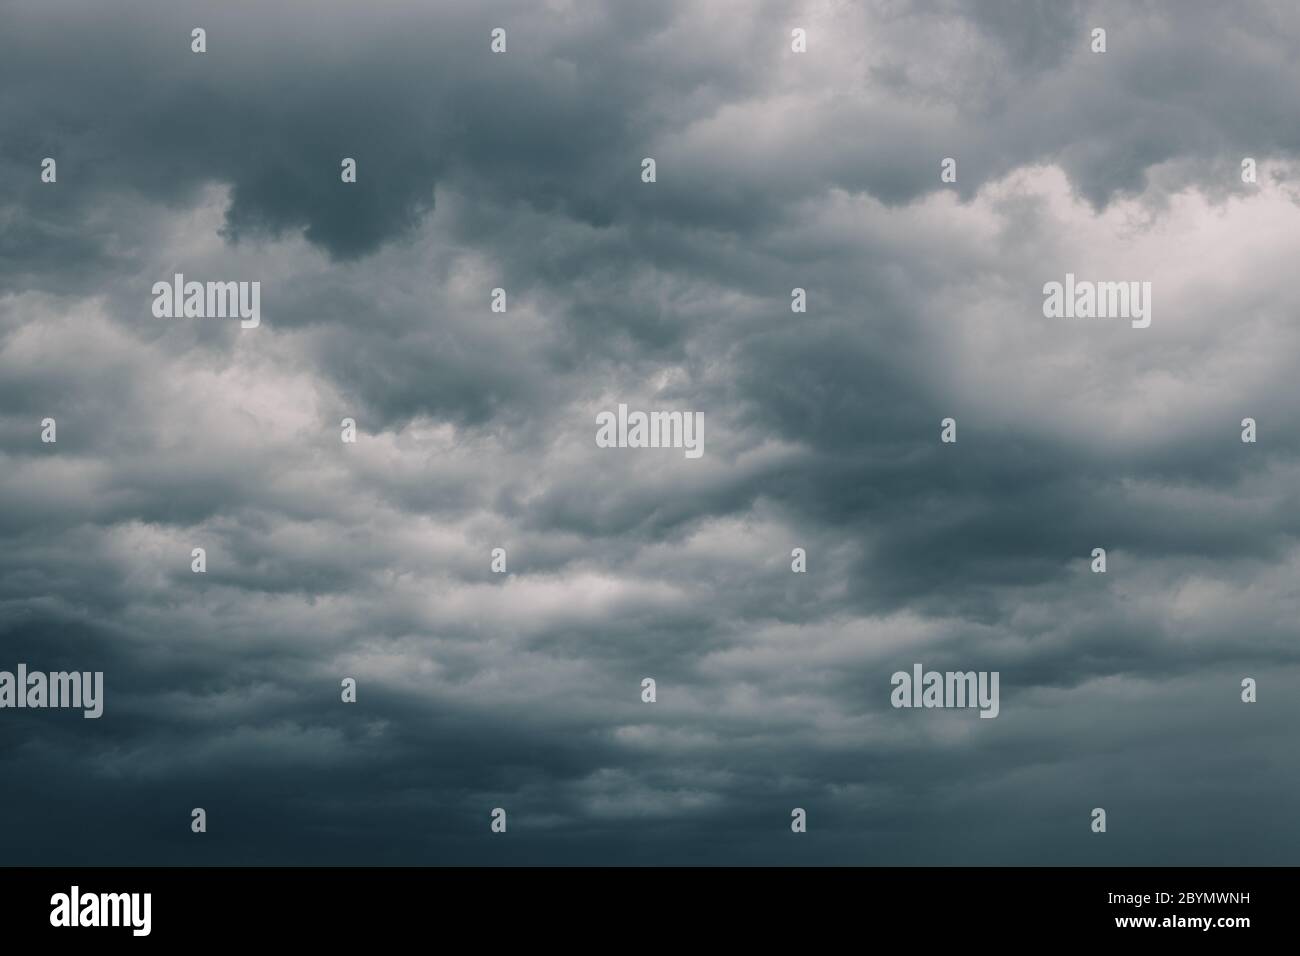 View of the stormy clouds in the sky Stock Photo